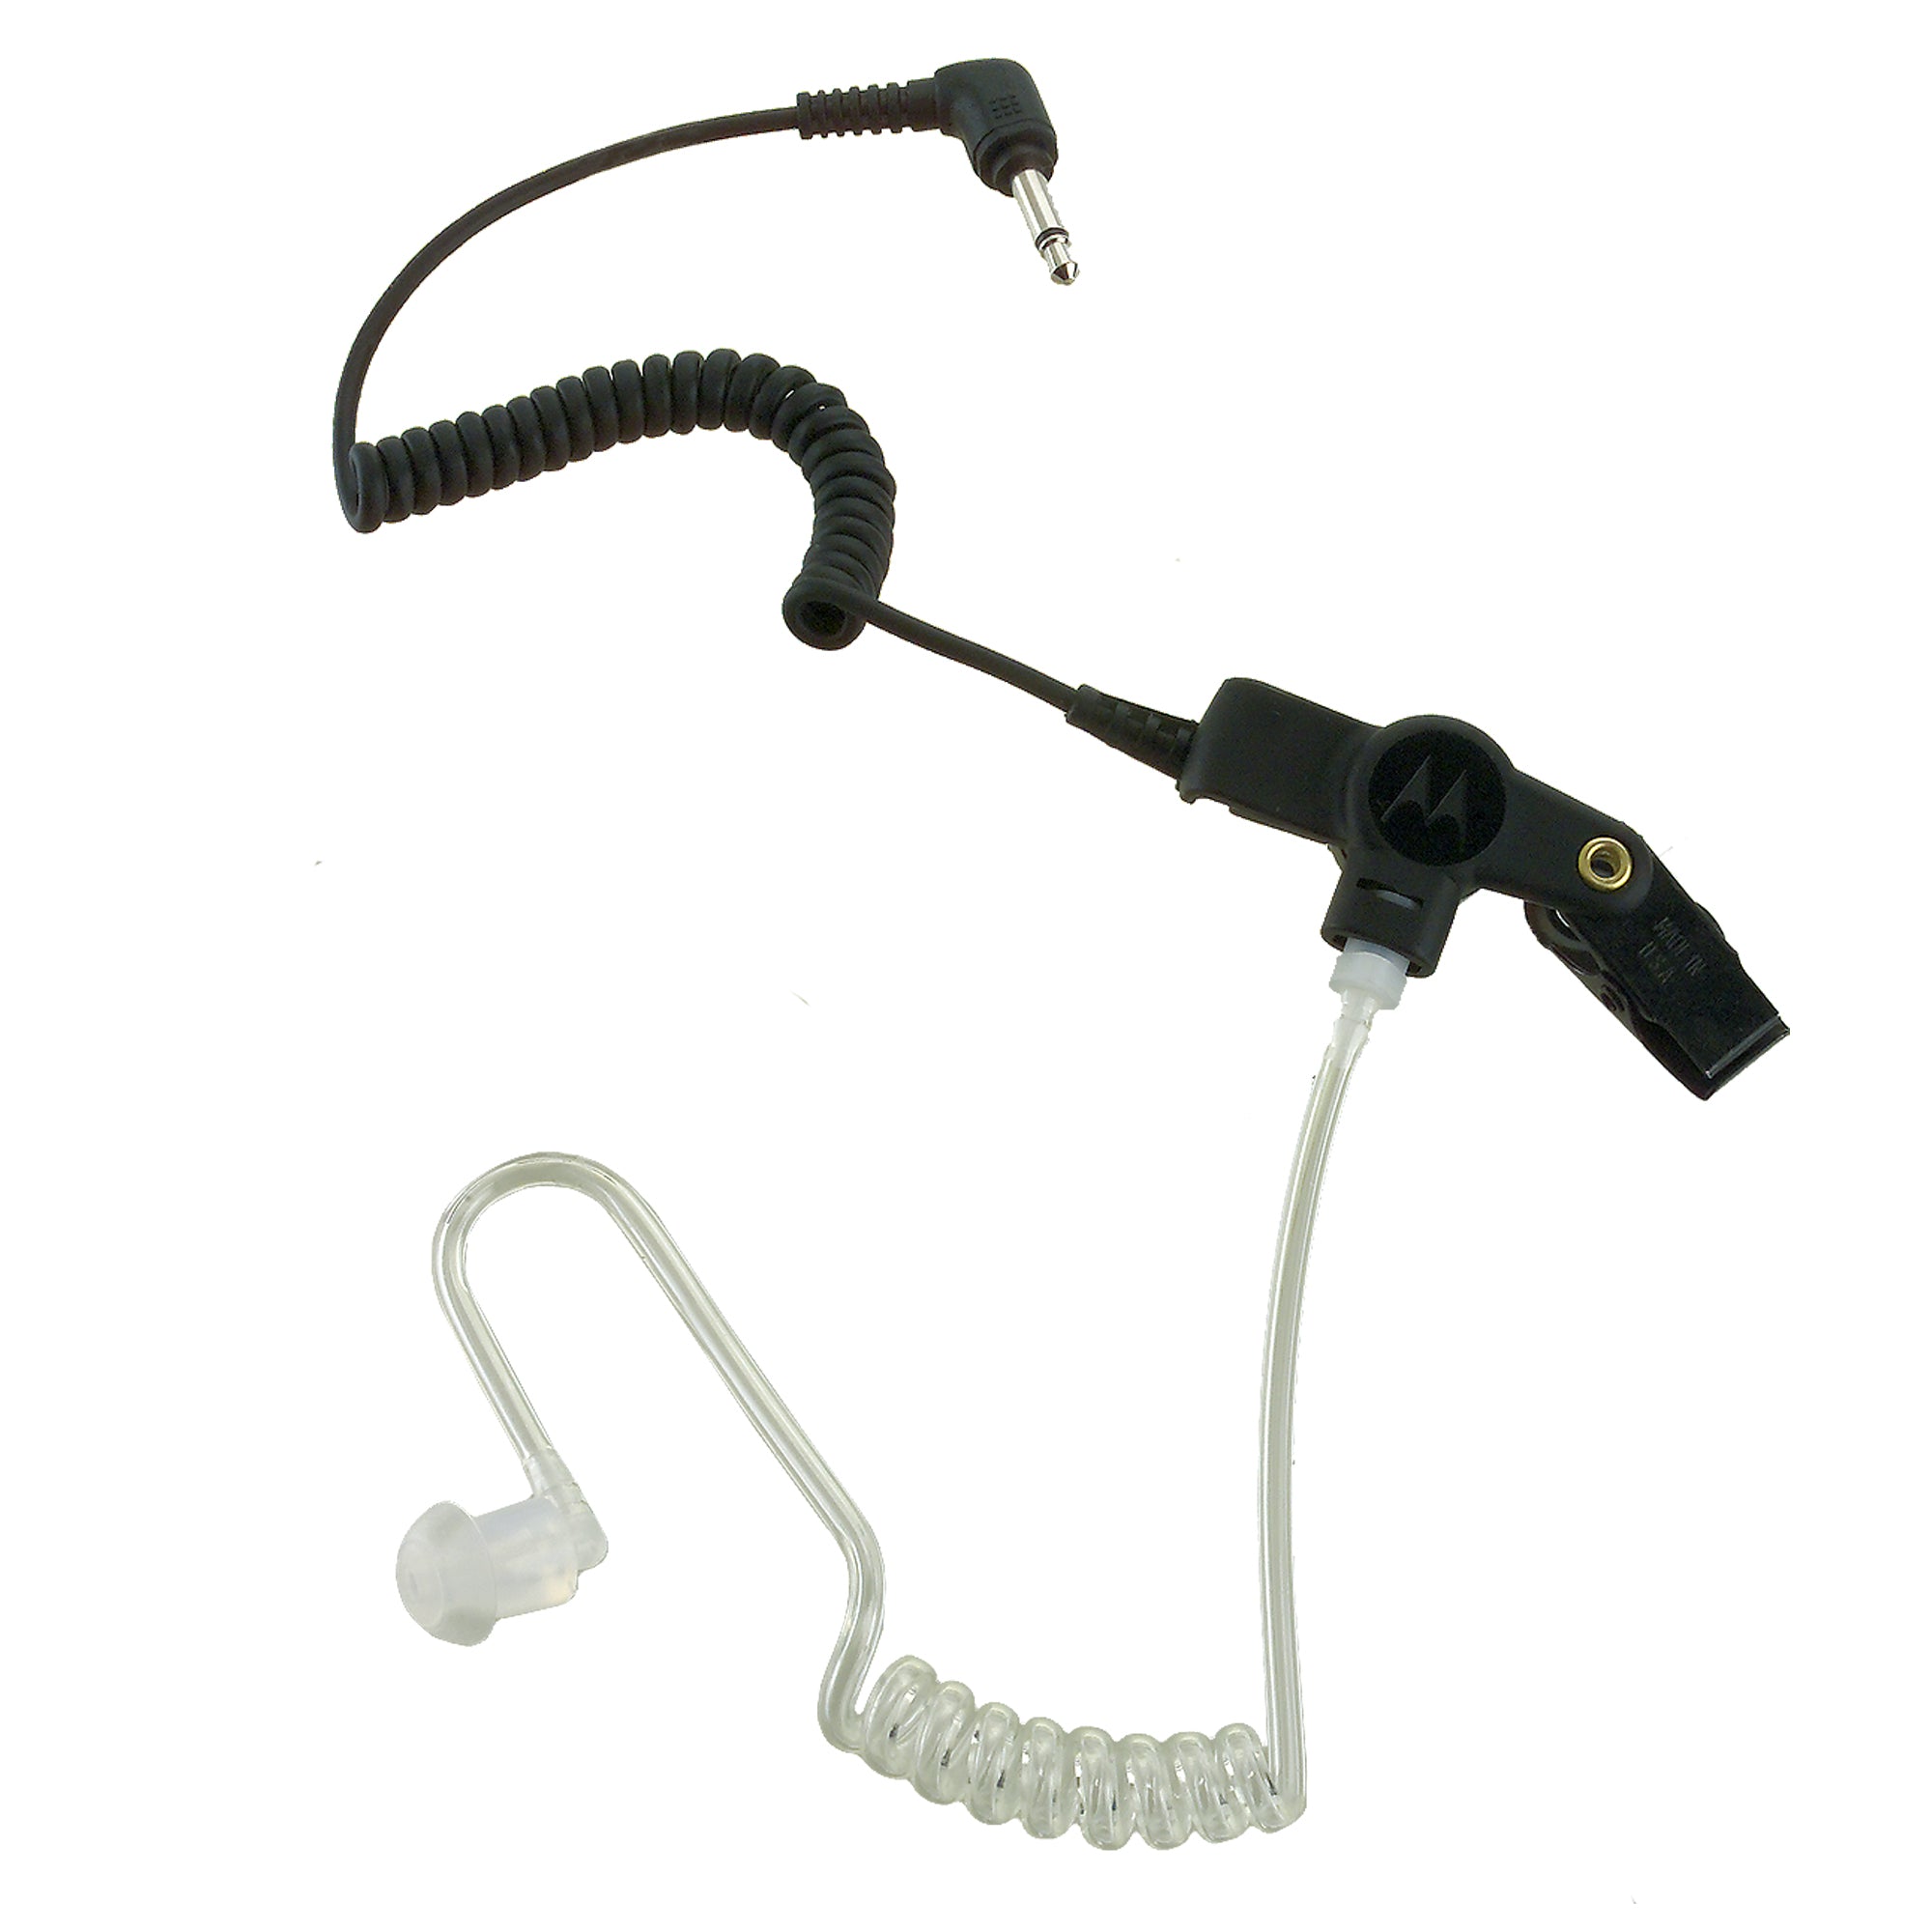 Motorola RLN4941 Earpiece Receive-Only with Translucent Tube